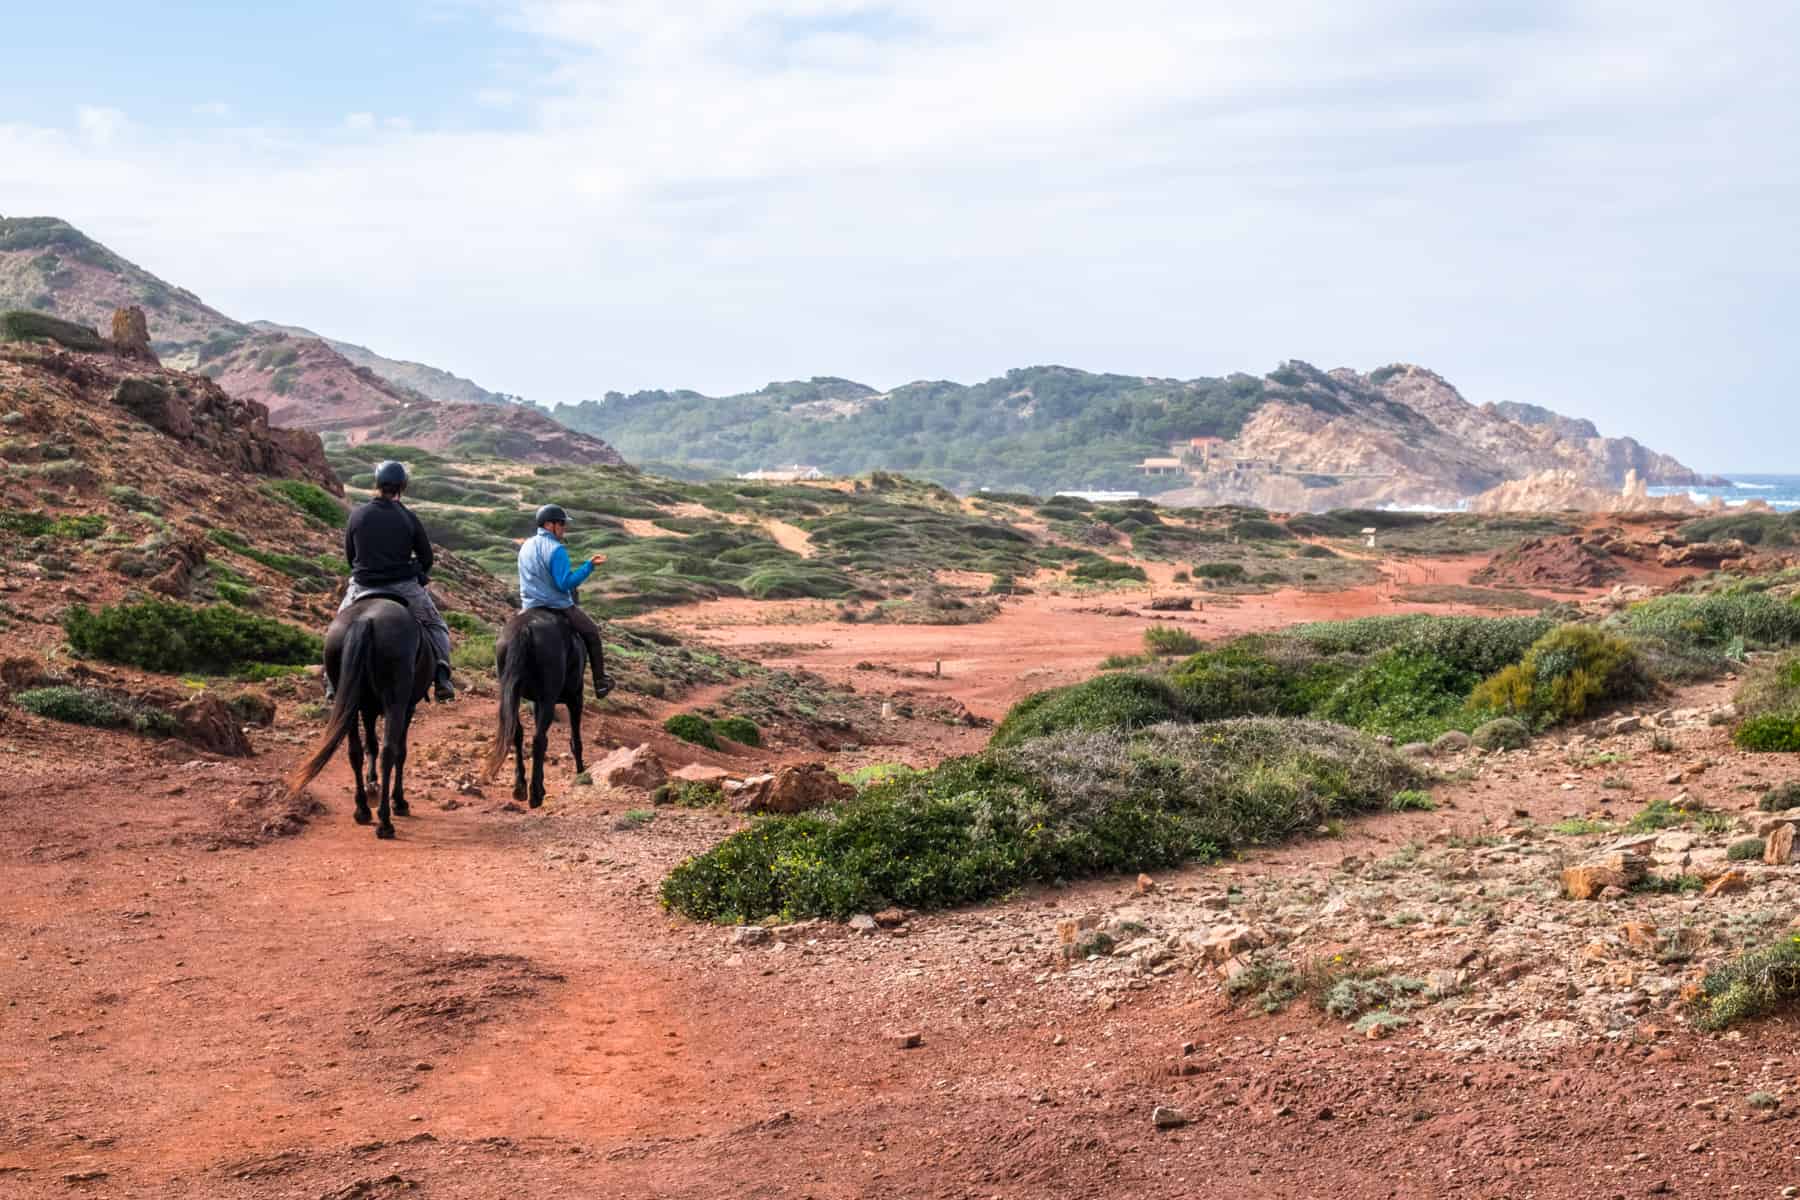 Two men on horseback trot through a rocky landscape with ochre red soil and patches of green foliage. 